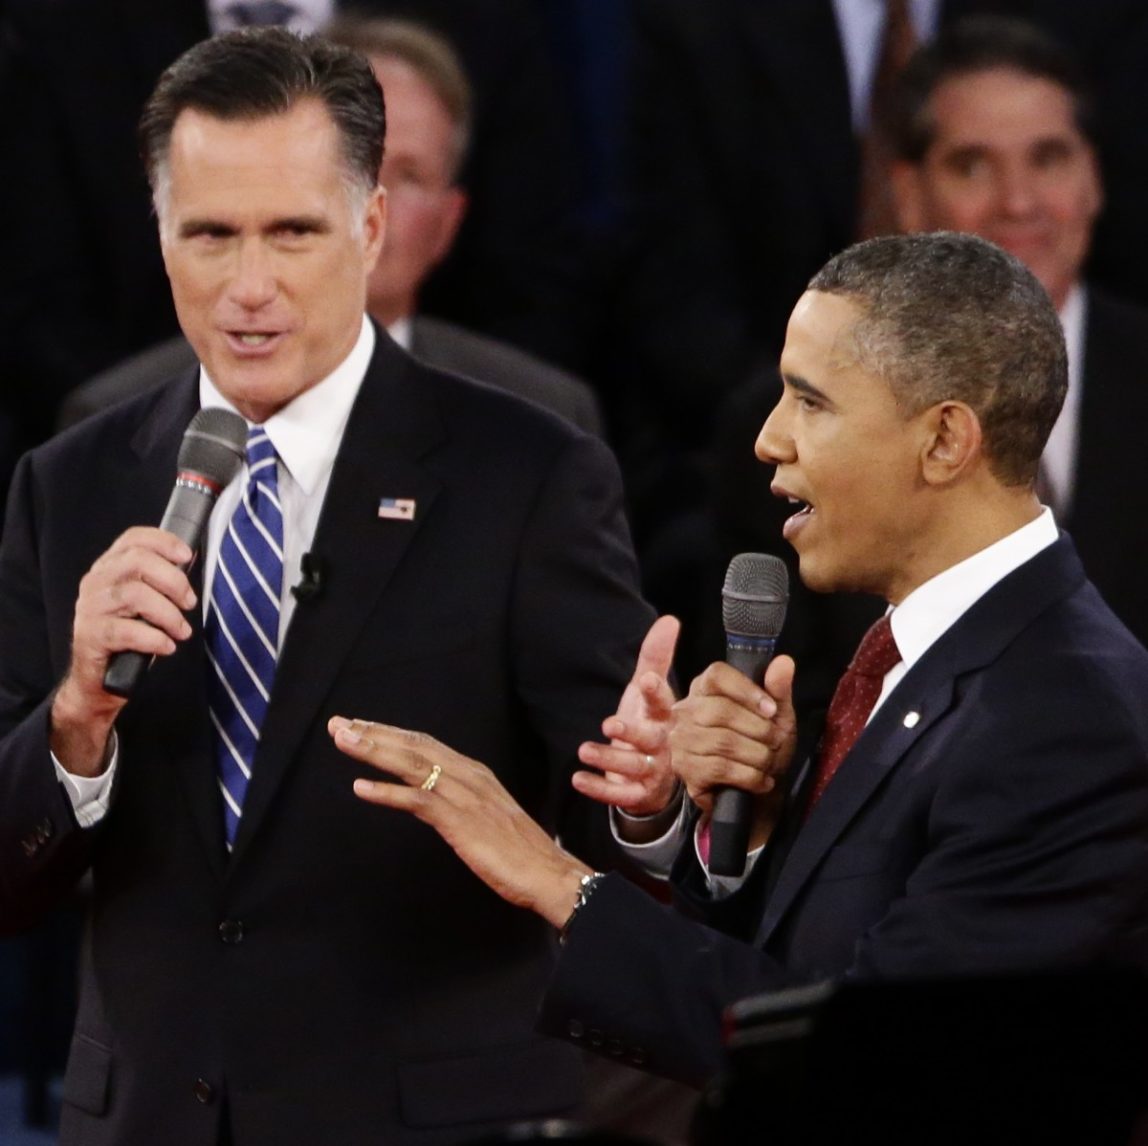 President Barack Obama and Republican presidential candidate and former Massachusetts Gov. Mitt Romney speak during the second presidential debate at Hofstra University in Hempstead, N.Y., Tuesday, Oct. 16, 2012. (AP Photo/Charles Dharapak)